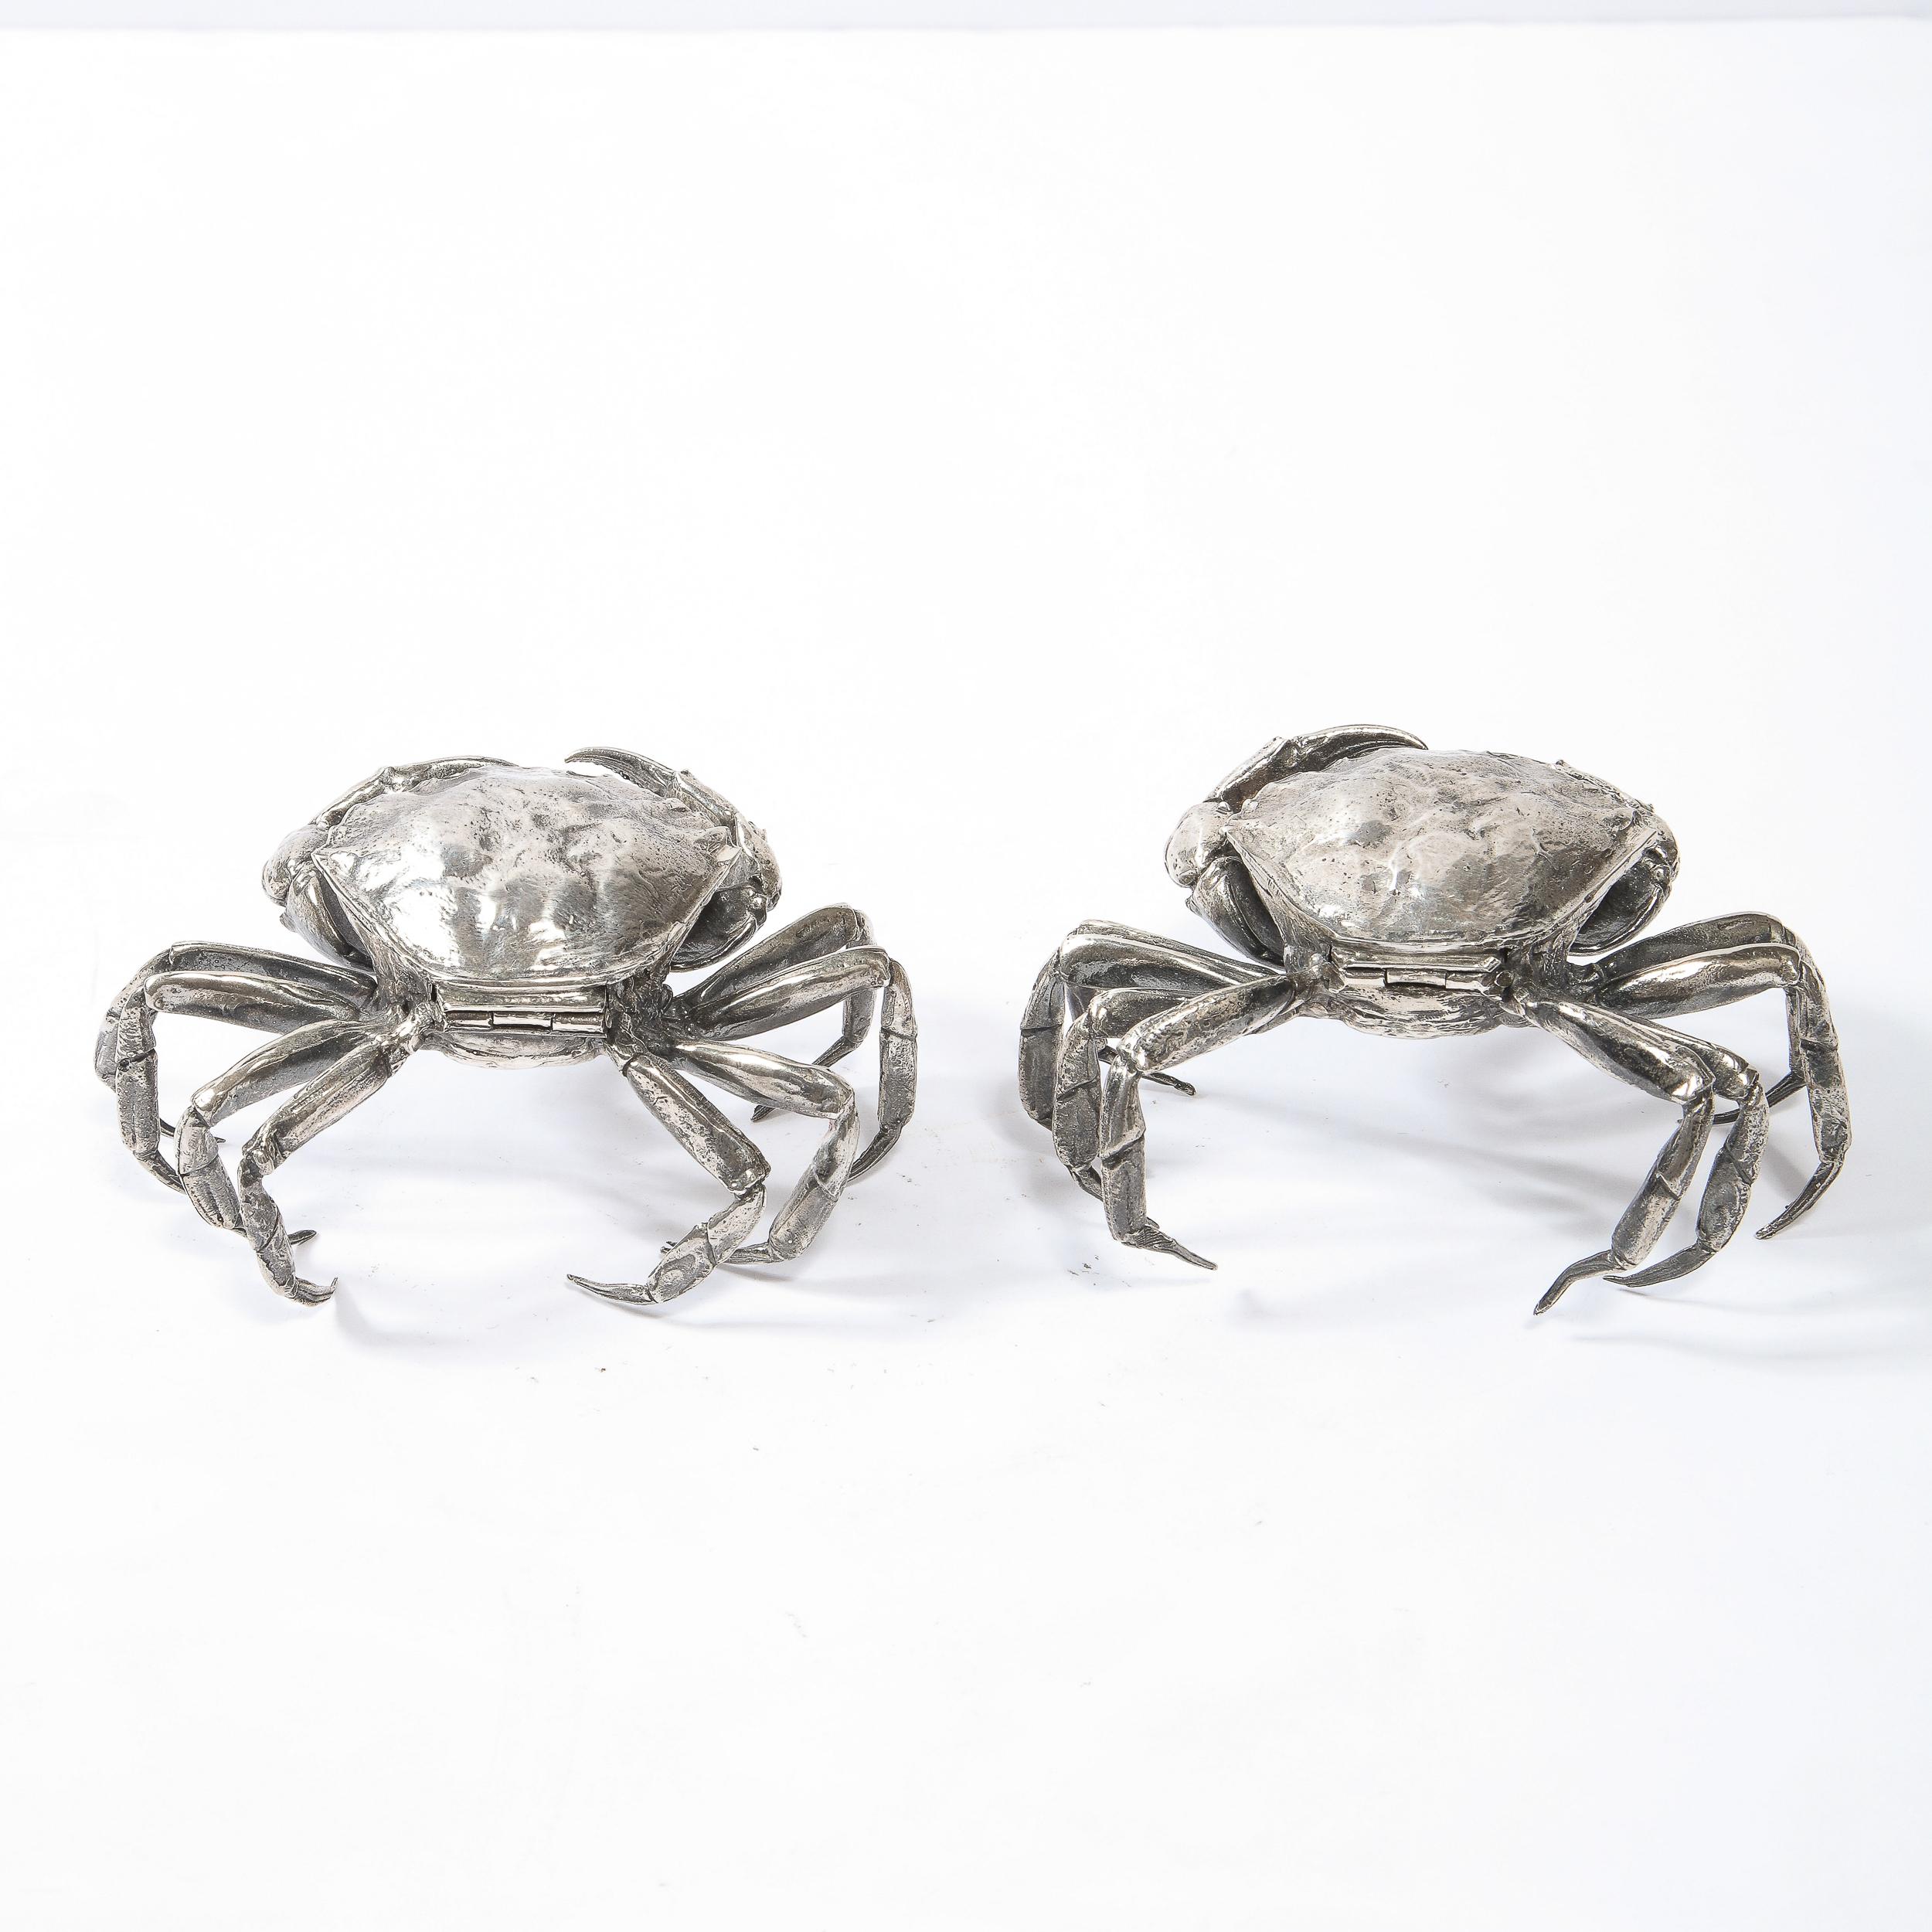 This stunning pair of modernist salt cellars was realized in Italy during the latter half of the 20th century. They offer stylized crab forms hand wrought in sterling silver, each offering eight legs and two claws with a lidded body that opens to